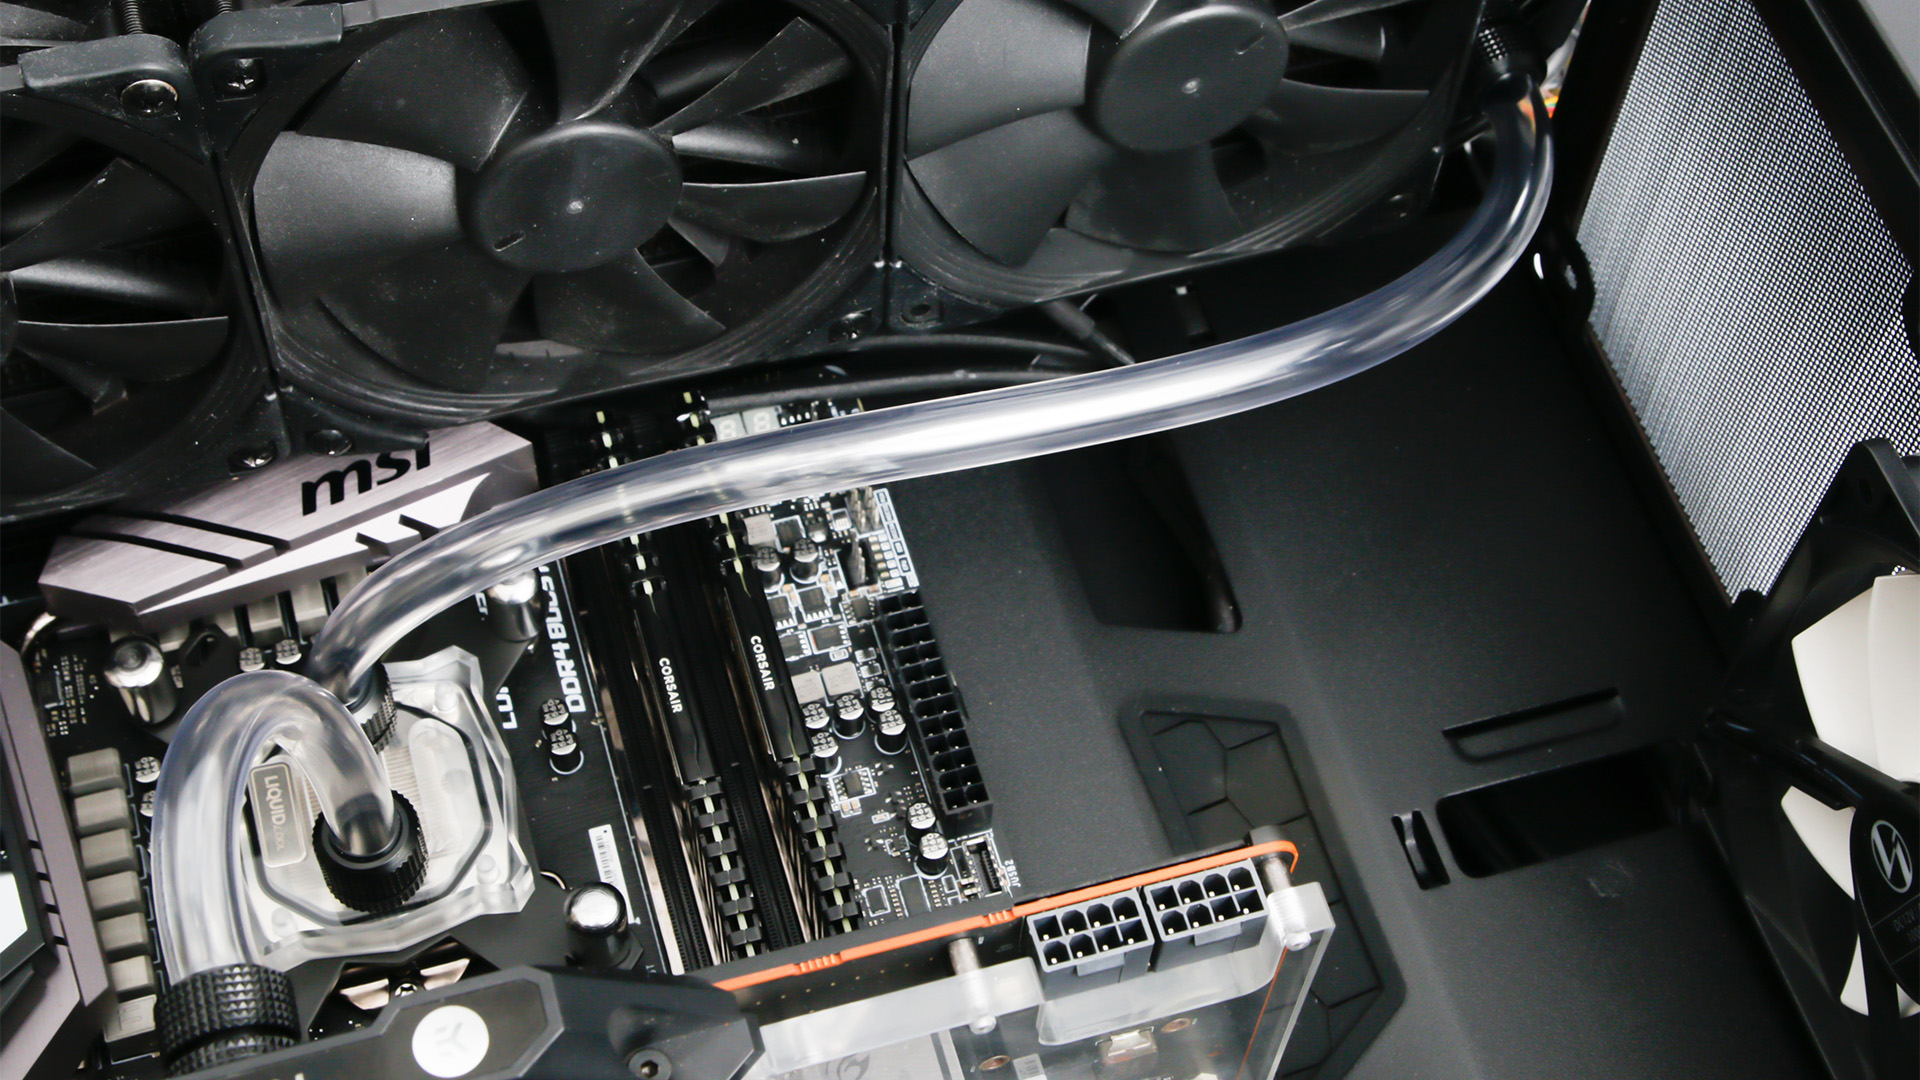 How to water cool your PC